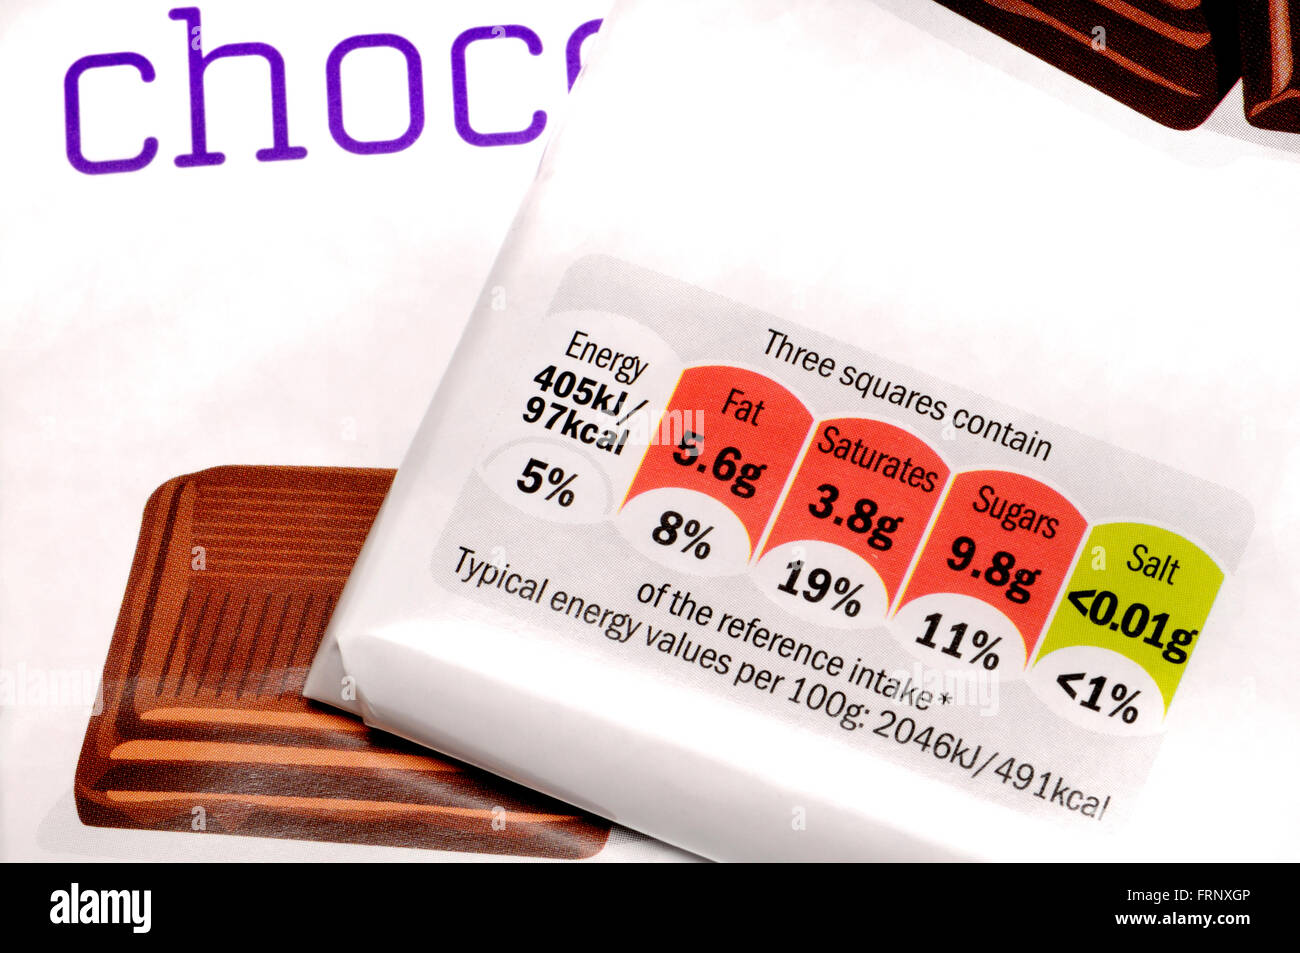 Chocolate bar wrappers showing nutritional information Stock Photo